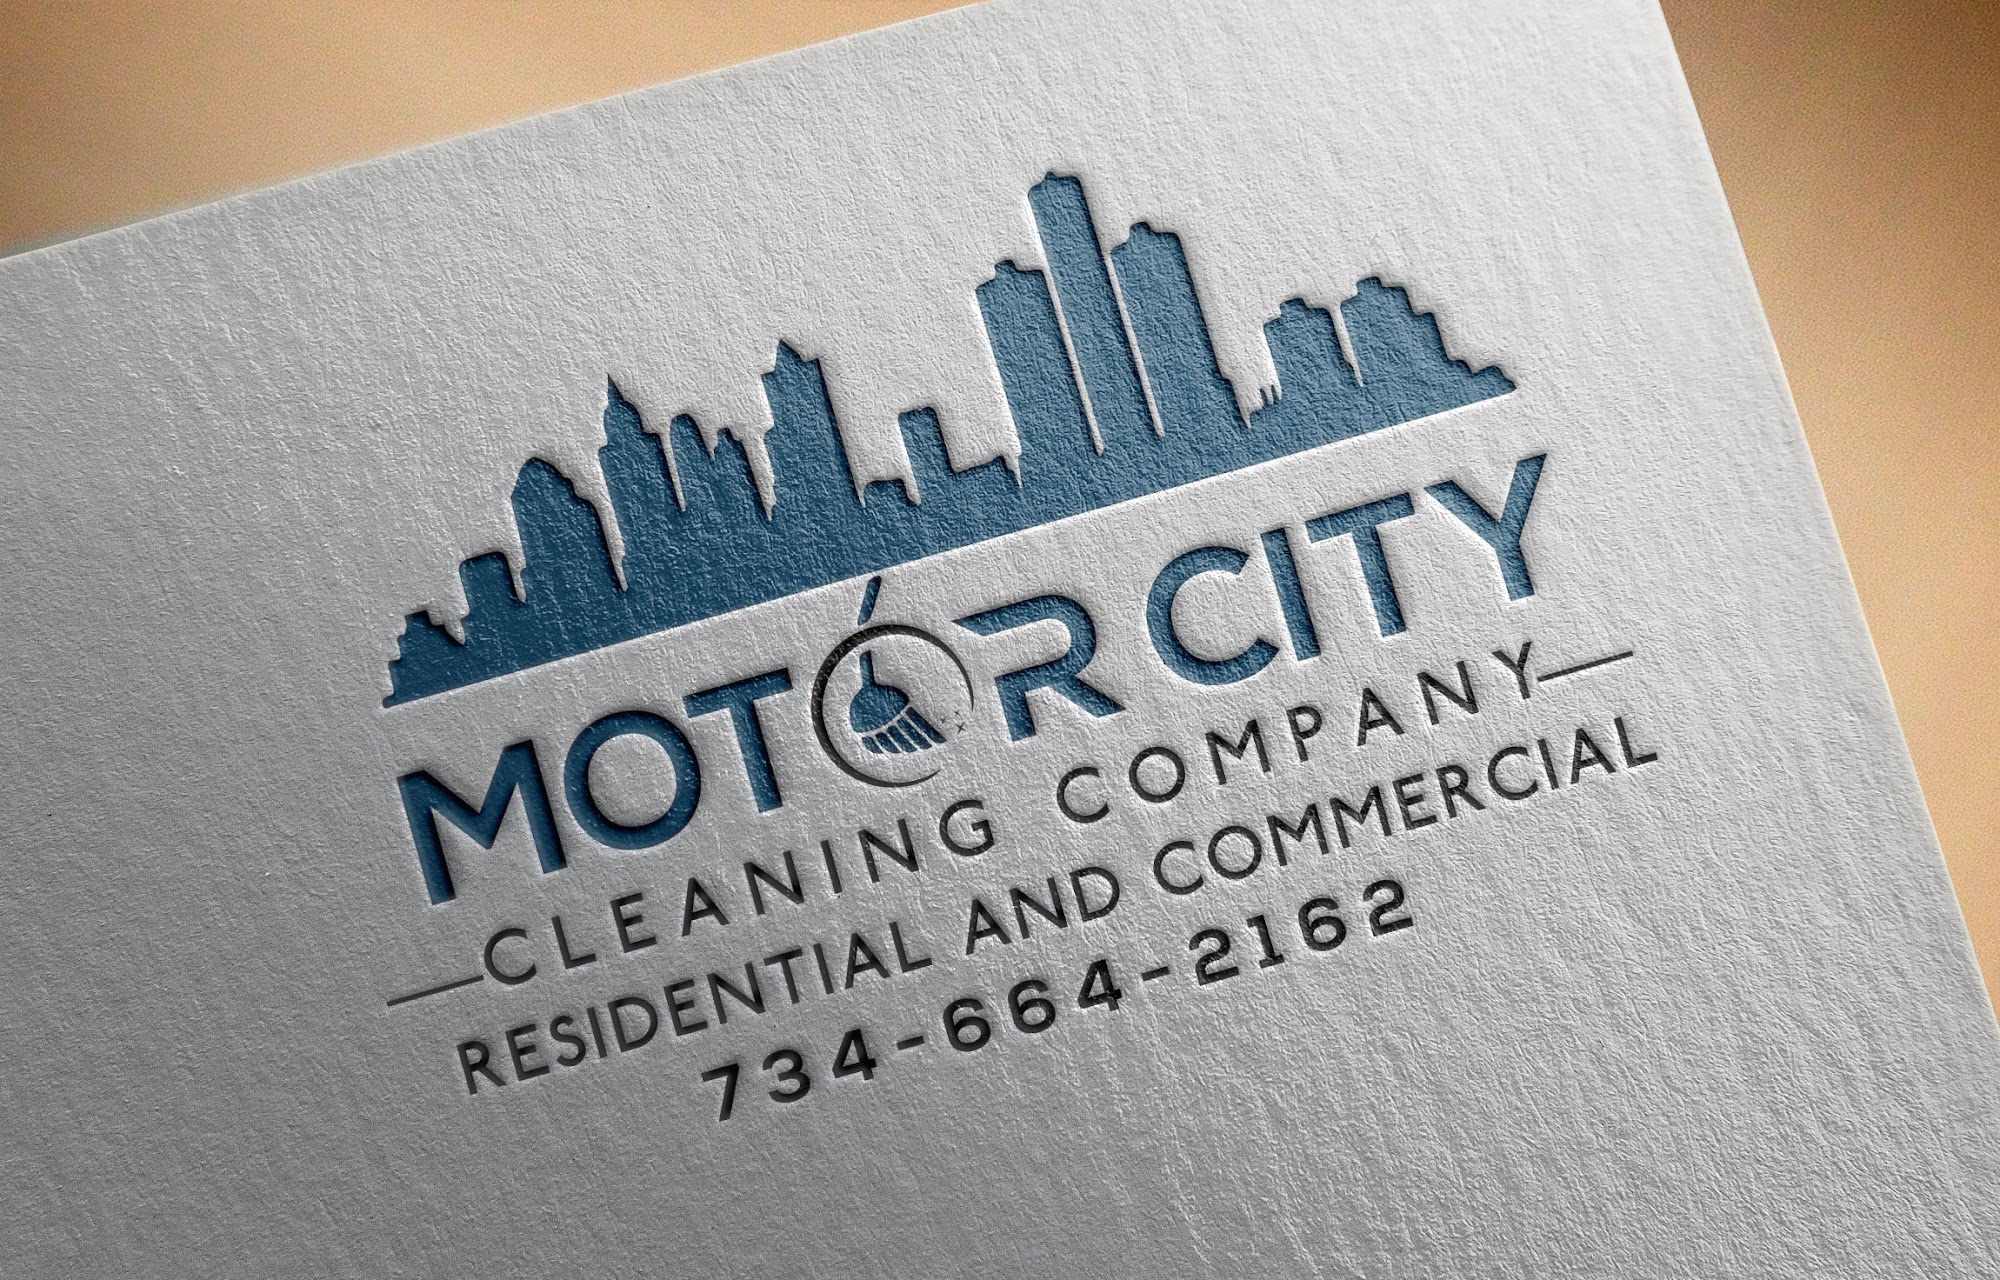 Motor City Cleaning Company (Commercial Cleaning)